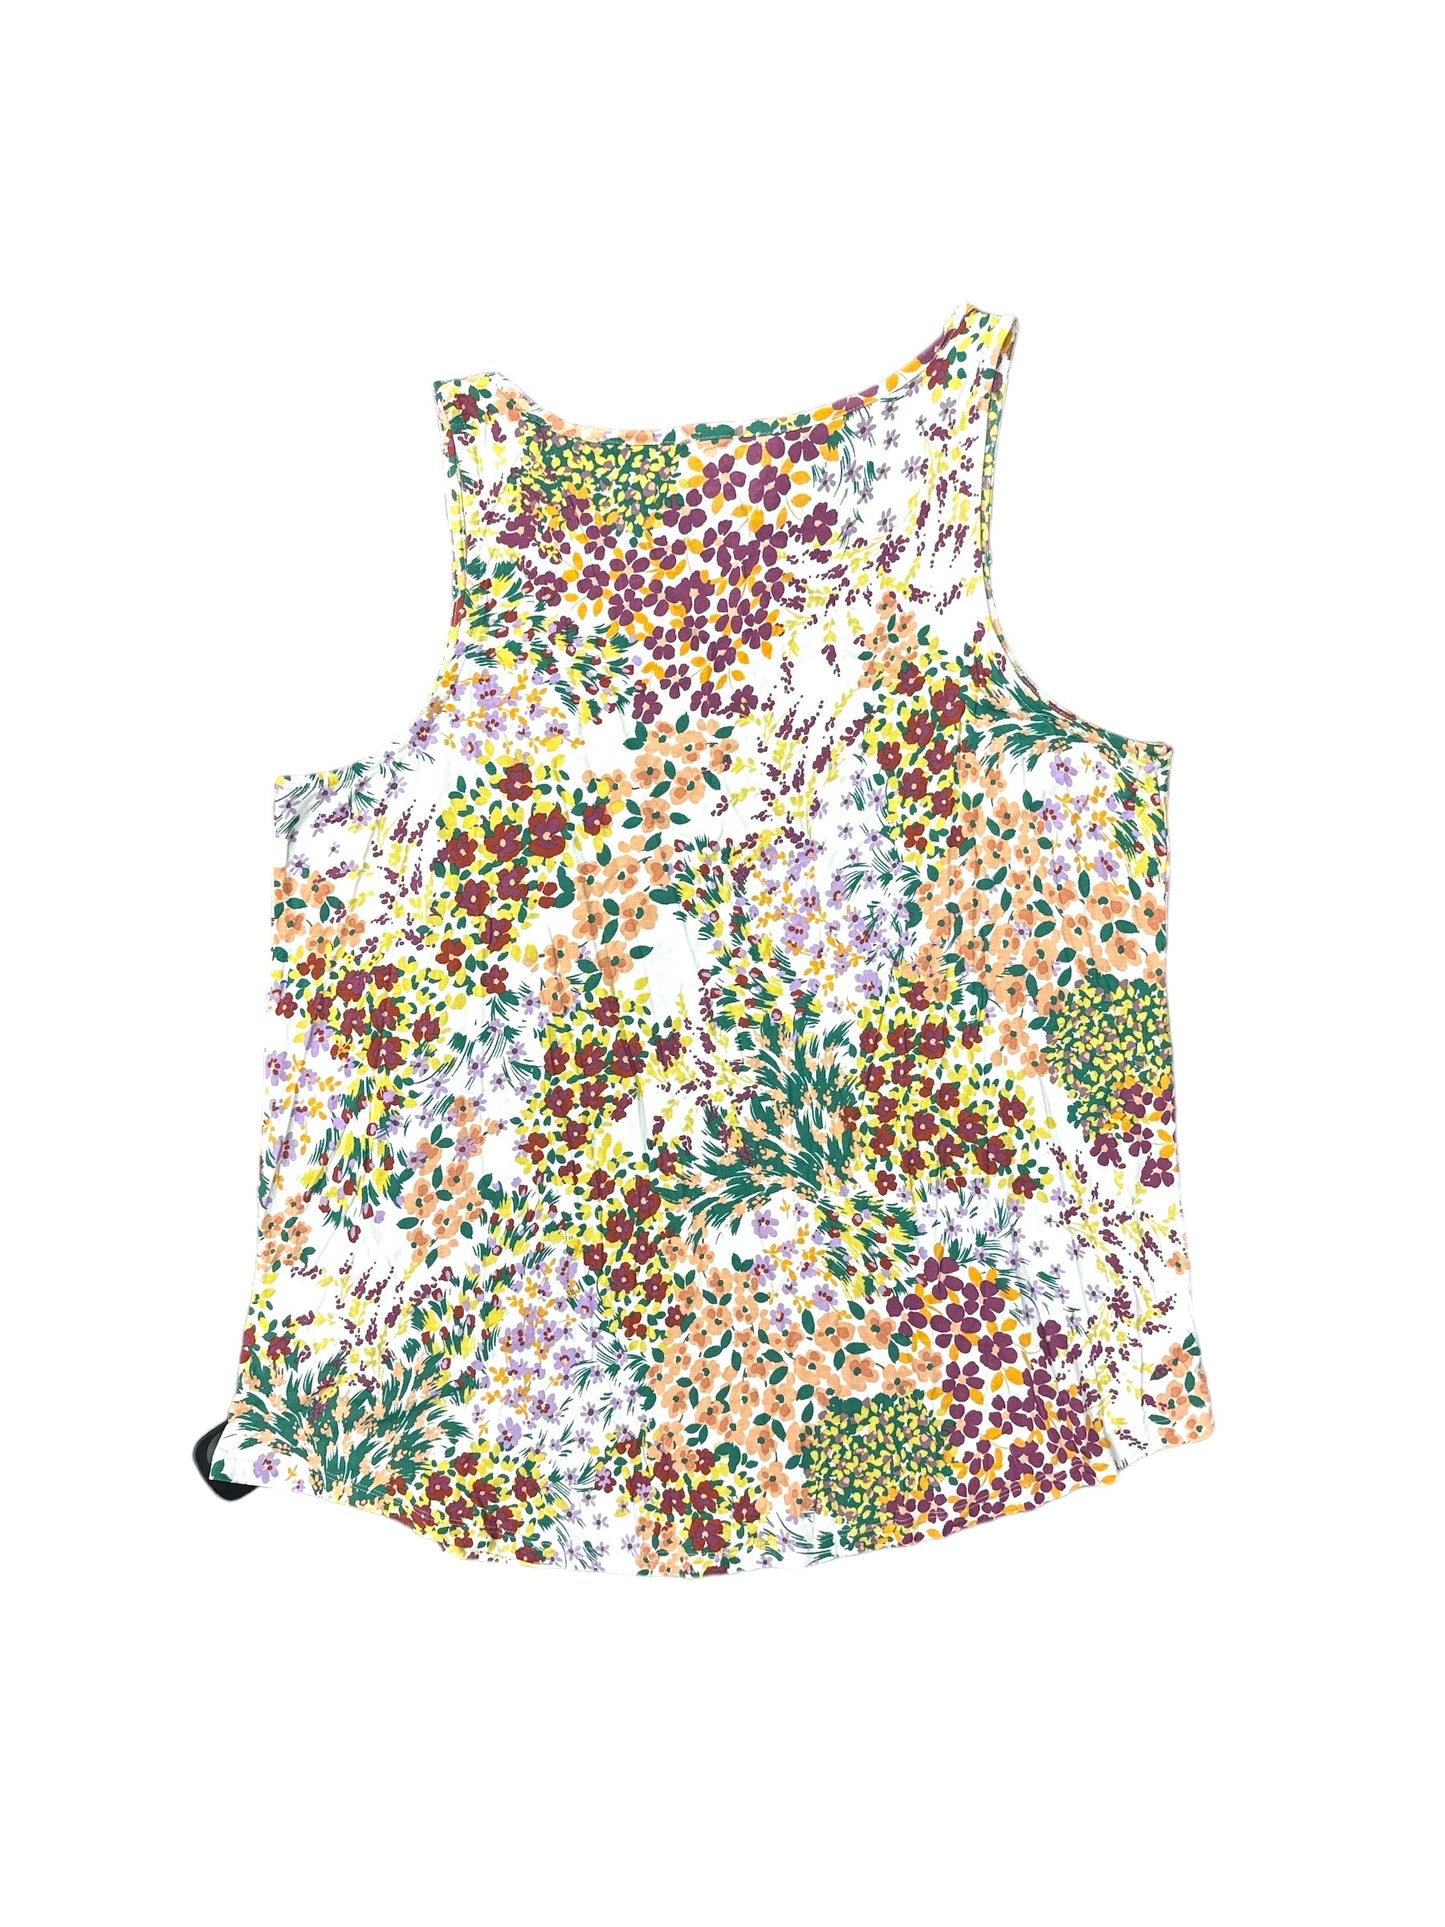 Floral Print Top Sleeveless Maurices, Size L